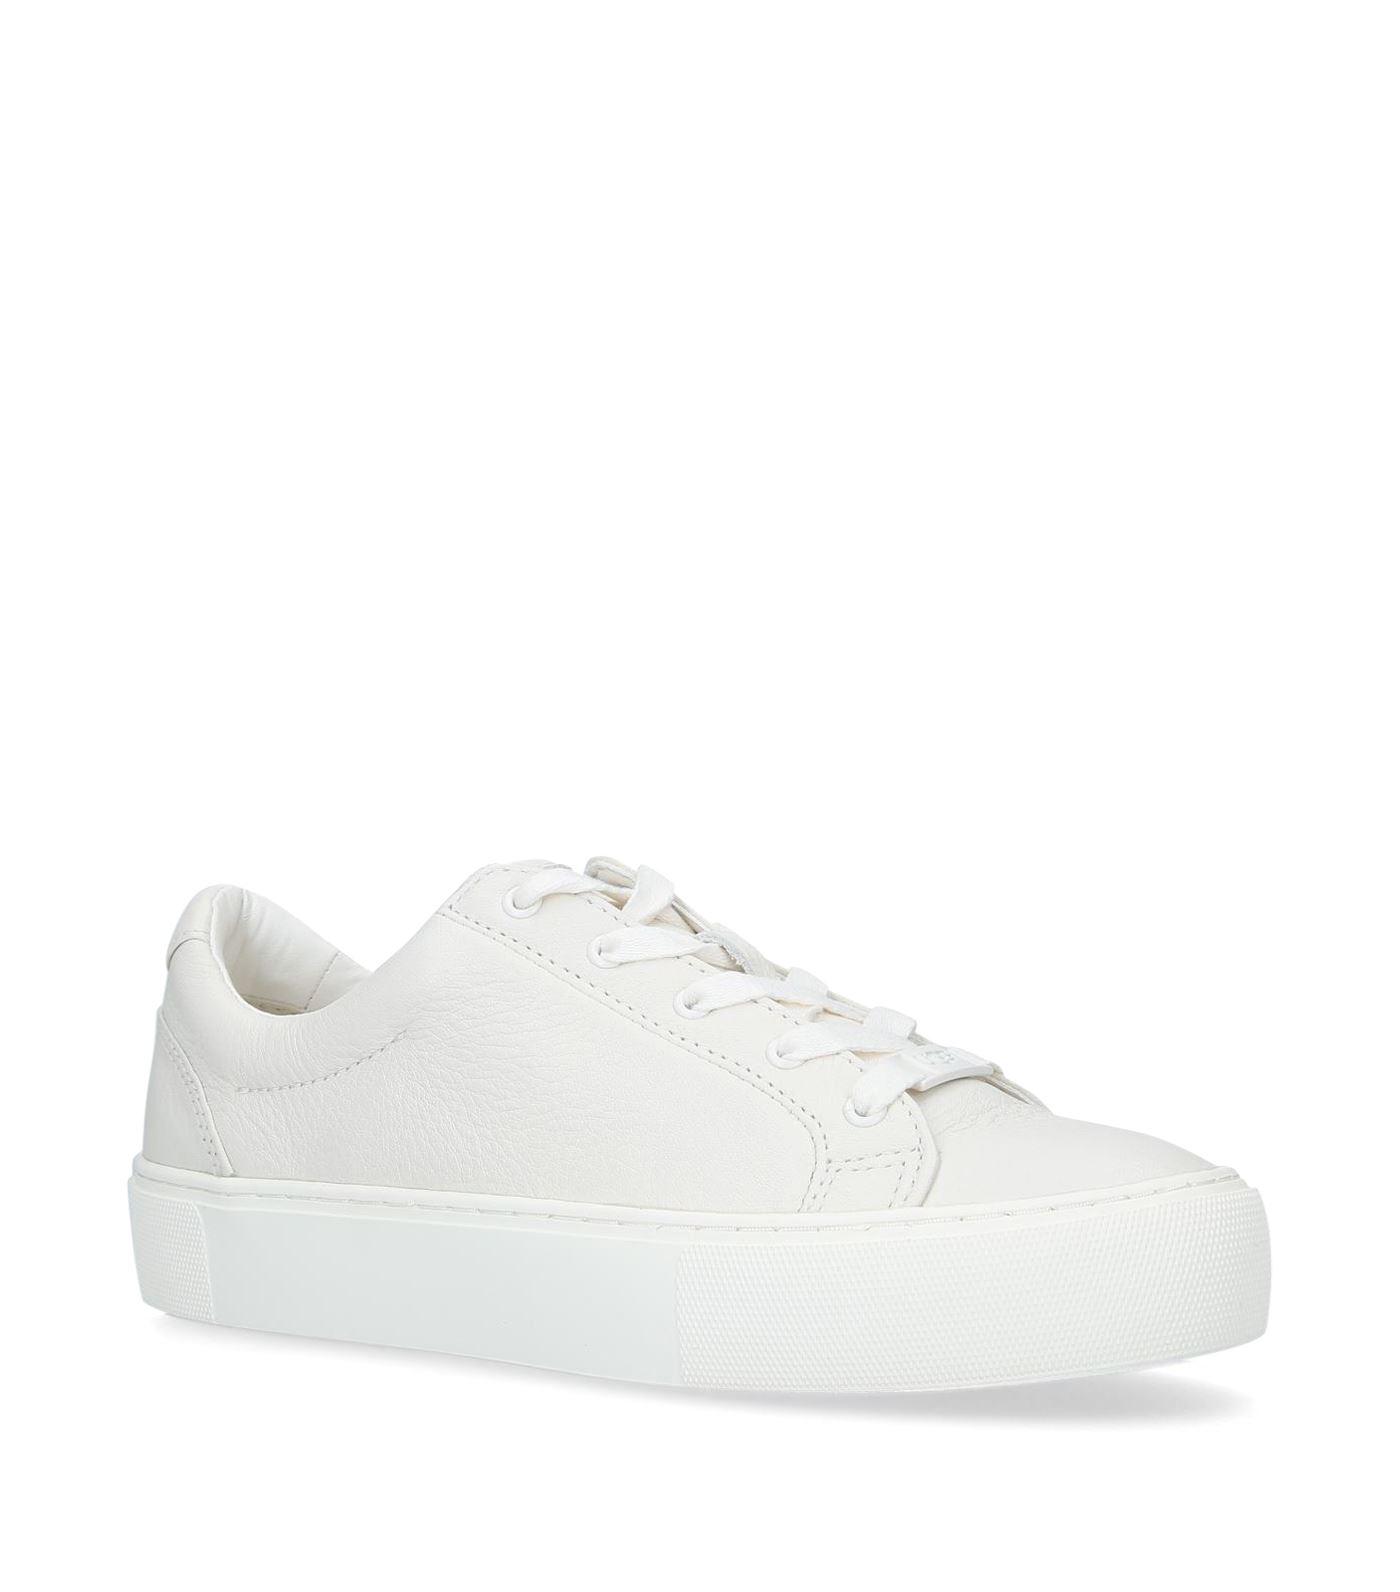 UGG Zilo Sneakers in White | Lyst